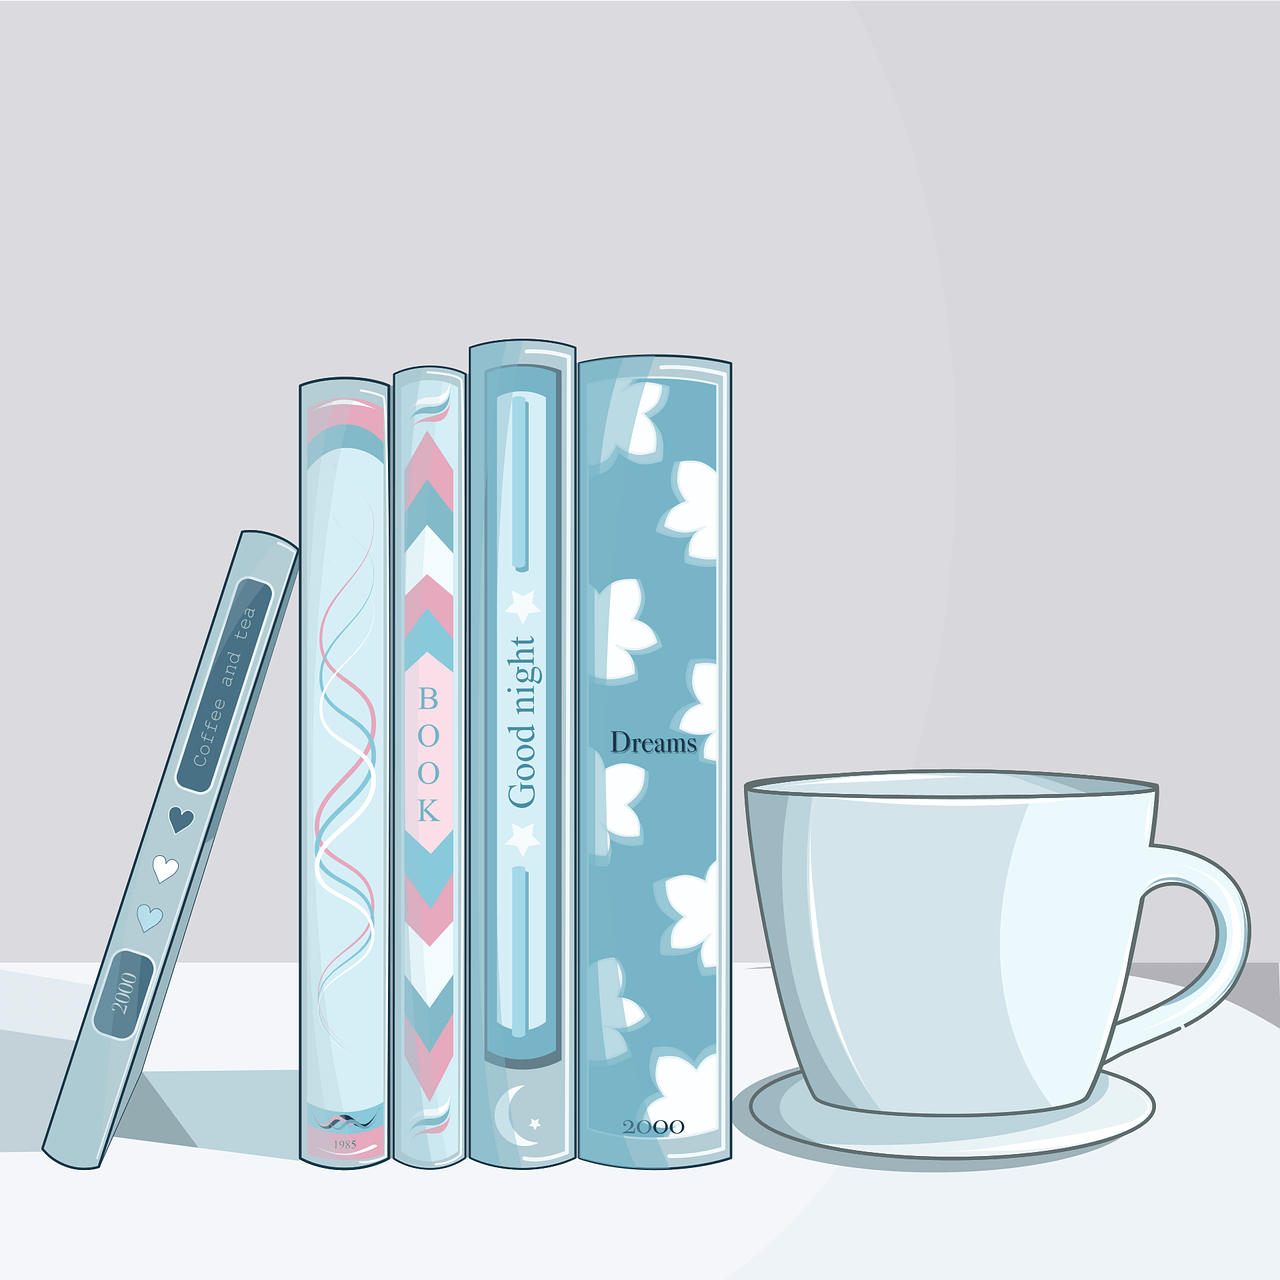 books and Cup